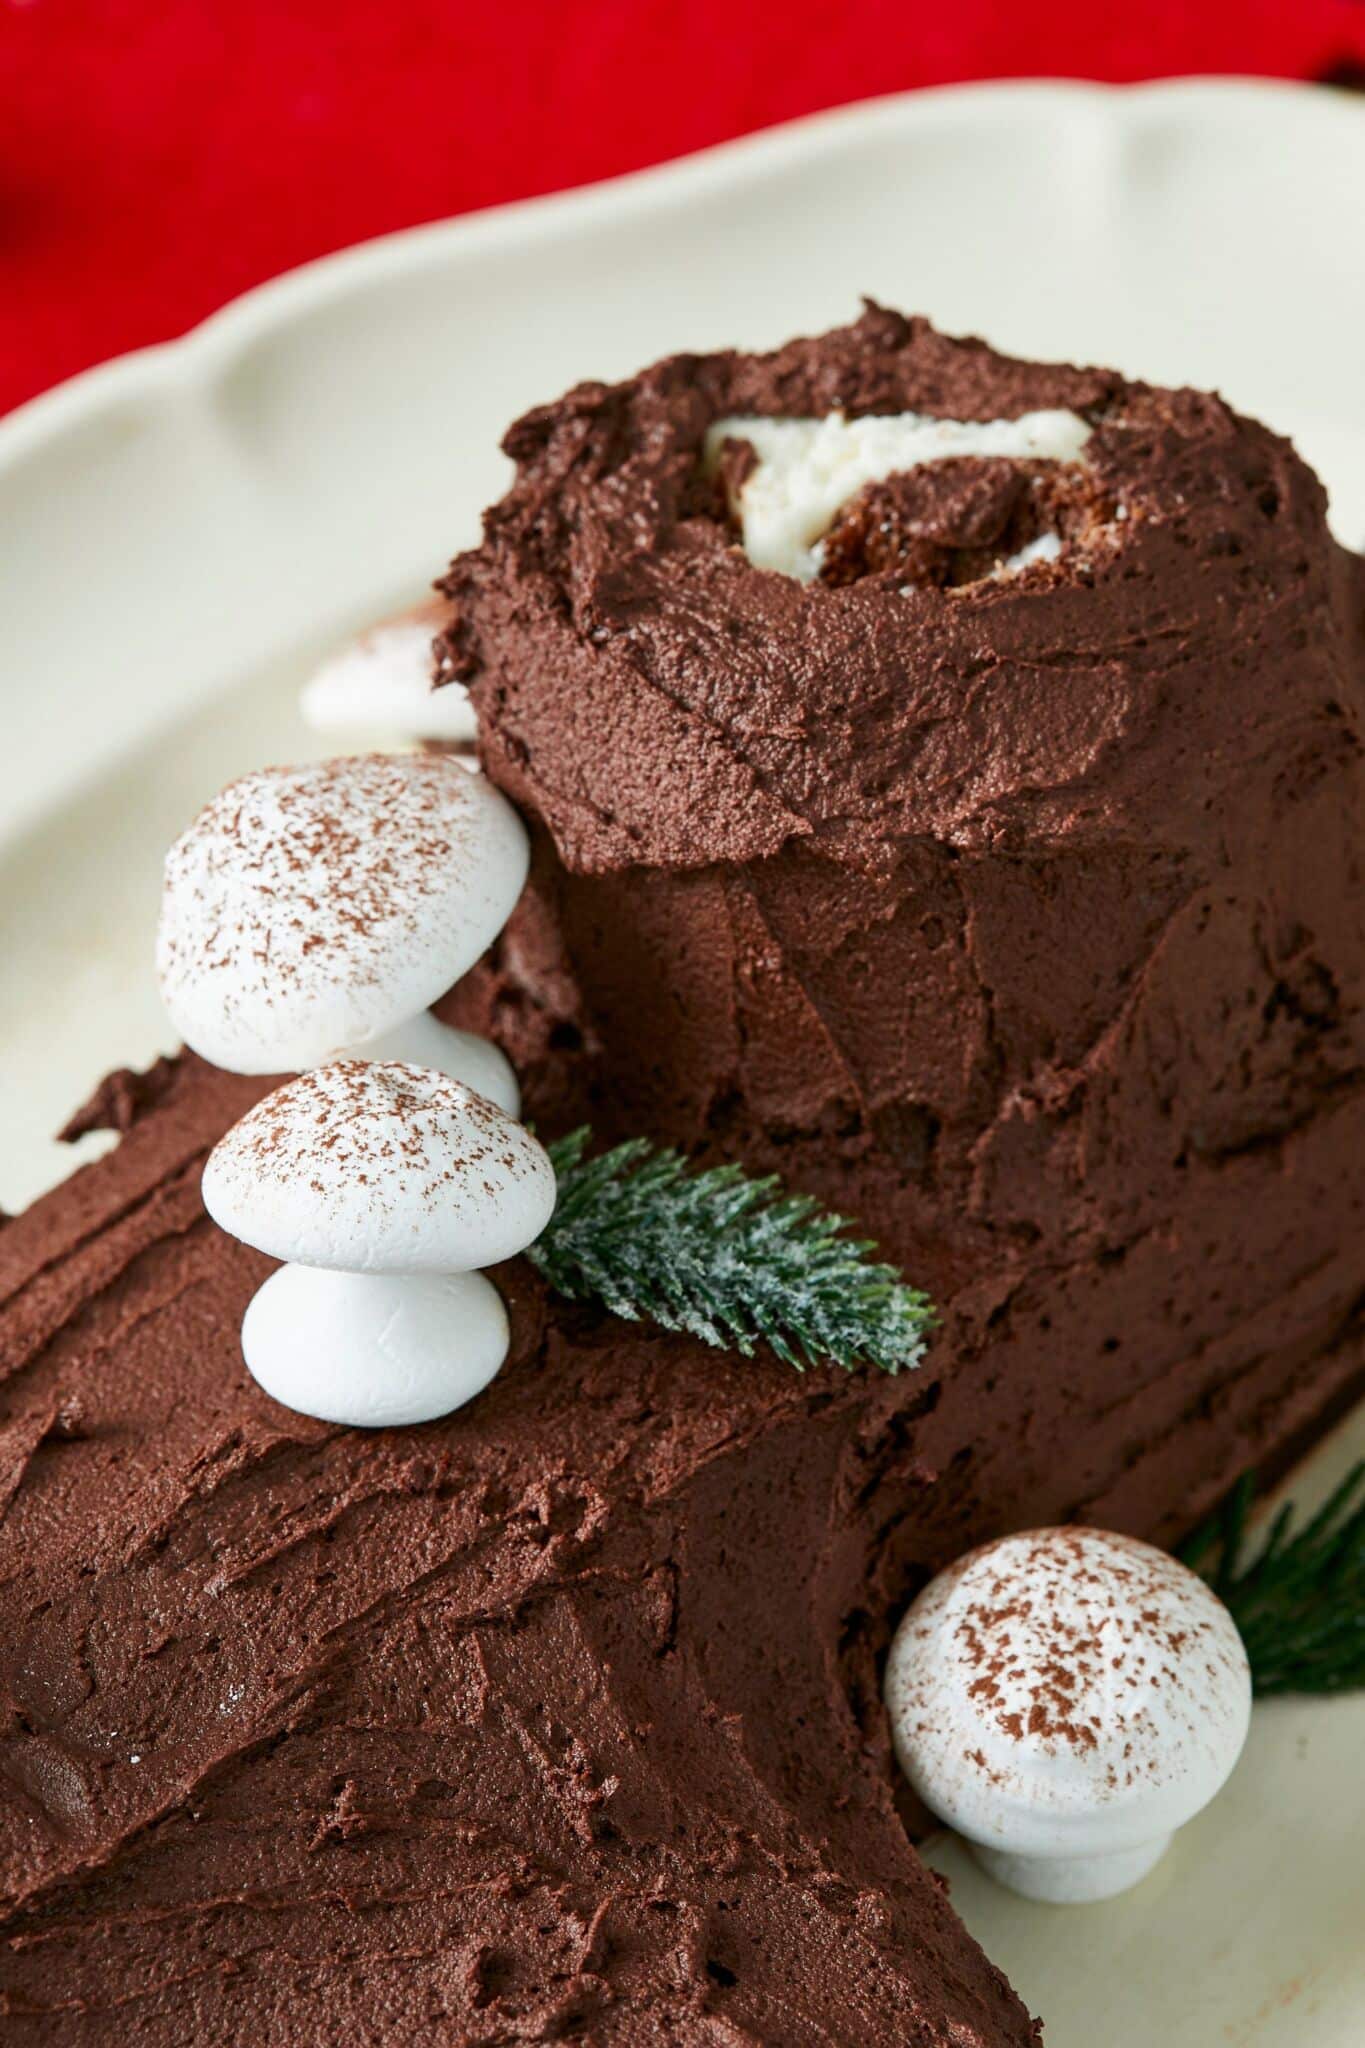 White Meringue Mushroom cookies are placed on the frosted chocolate-color Bûche de Noël.